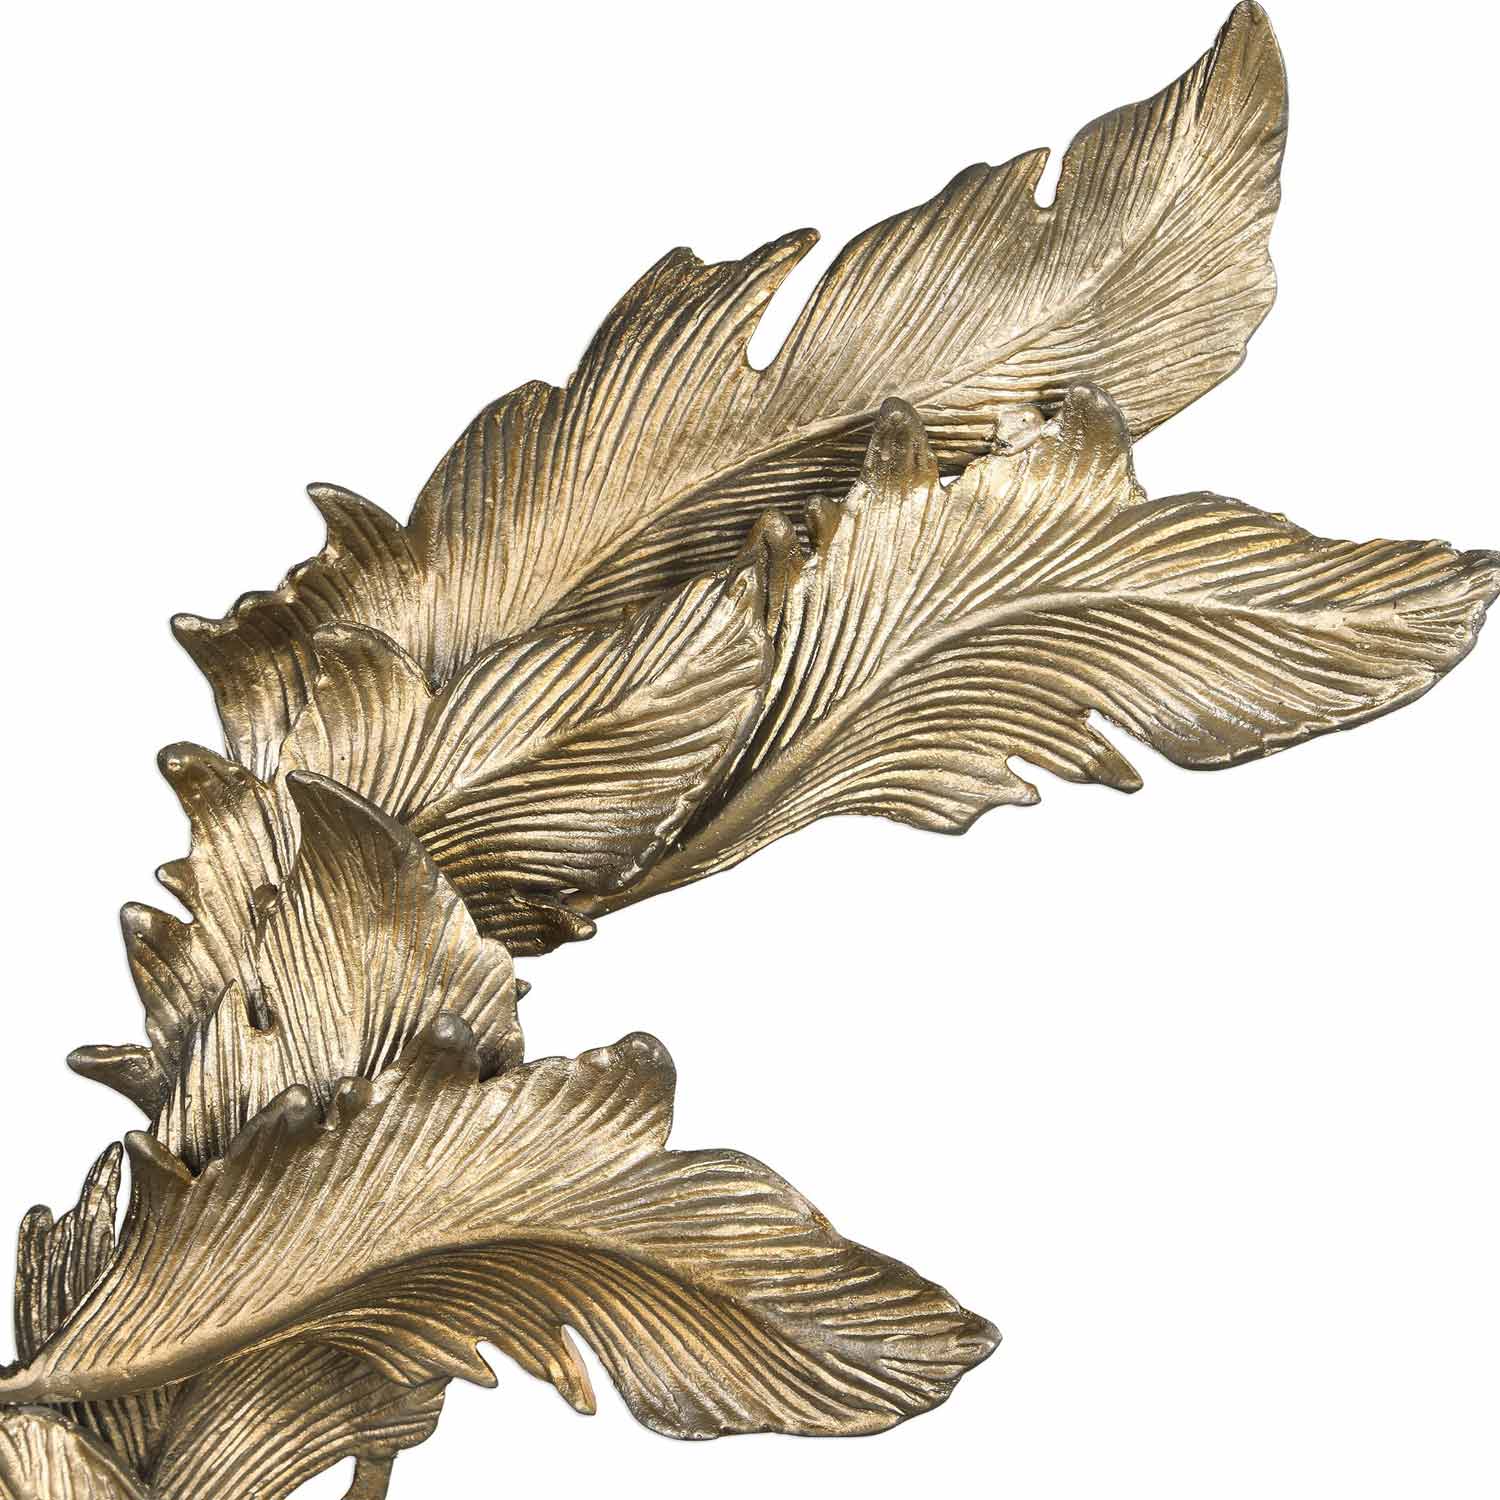 Uttermost Fall Leaves Sculpture - Champagne